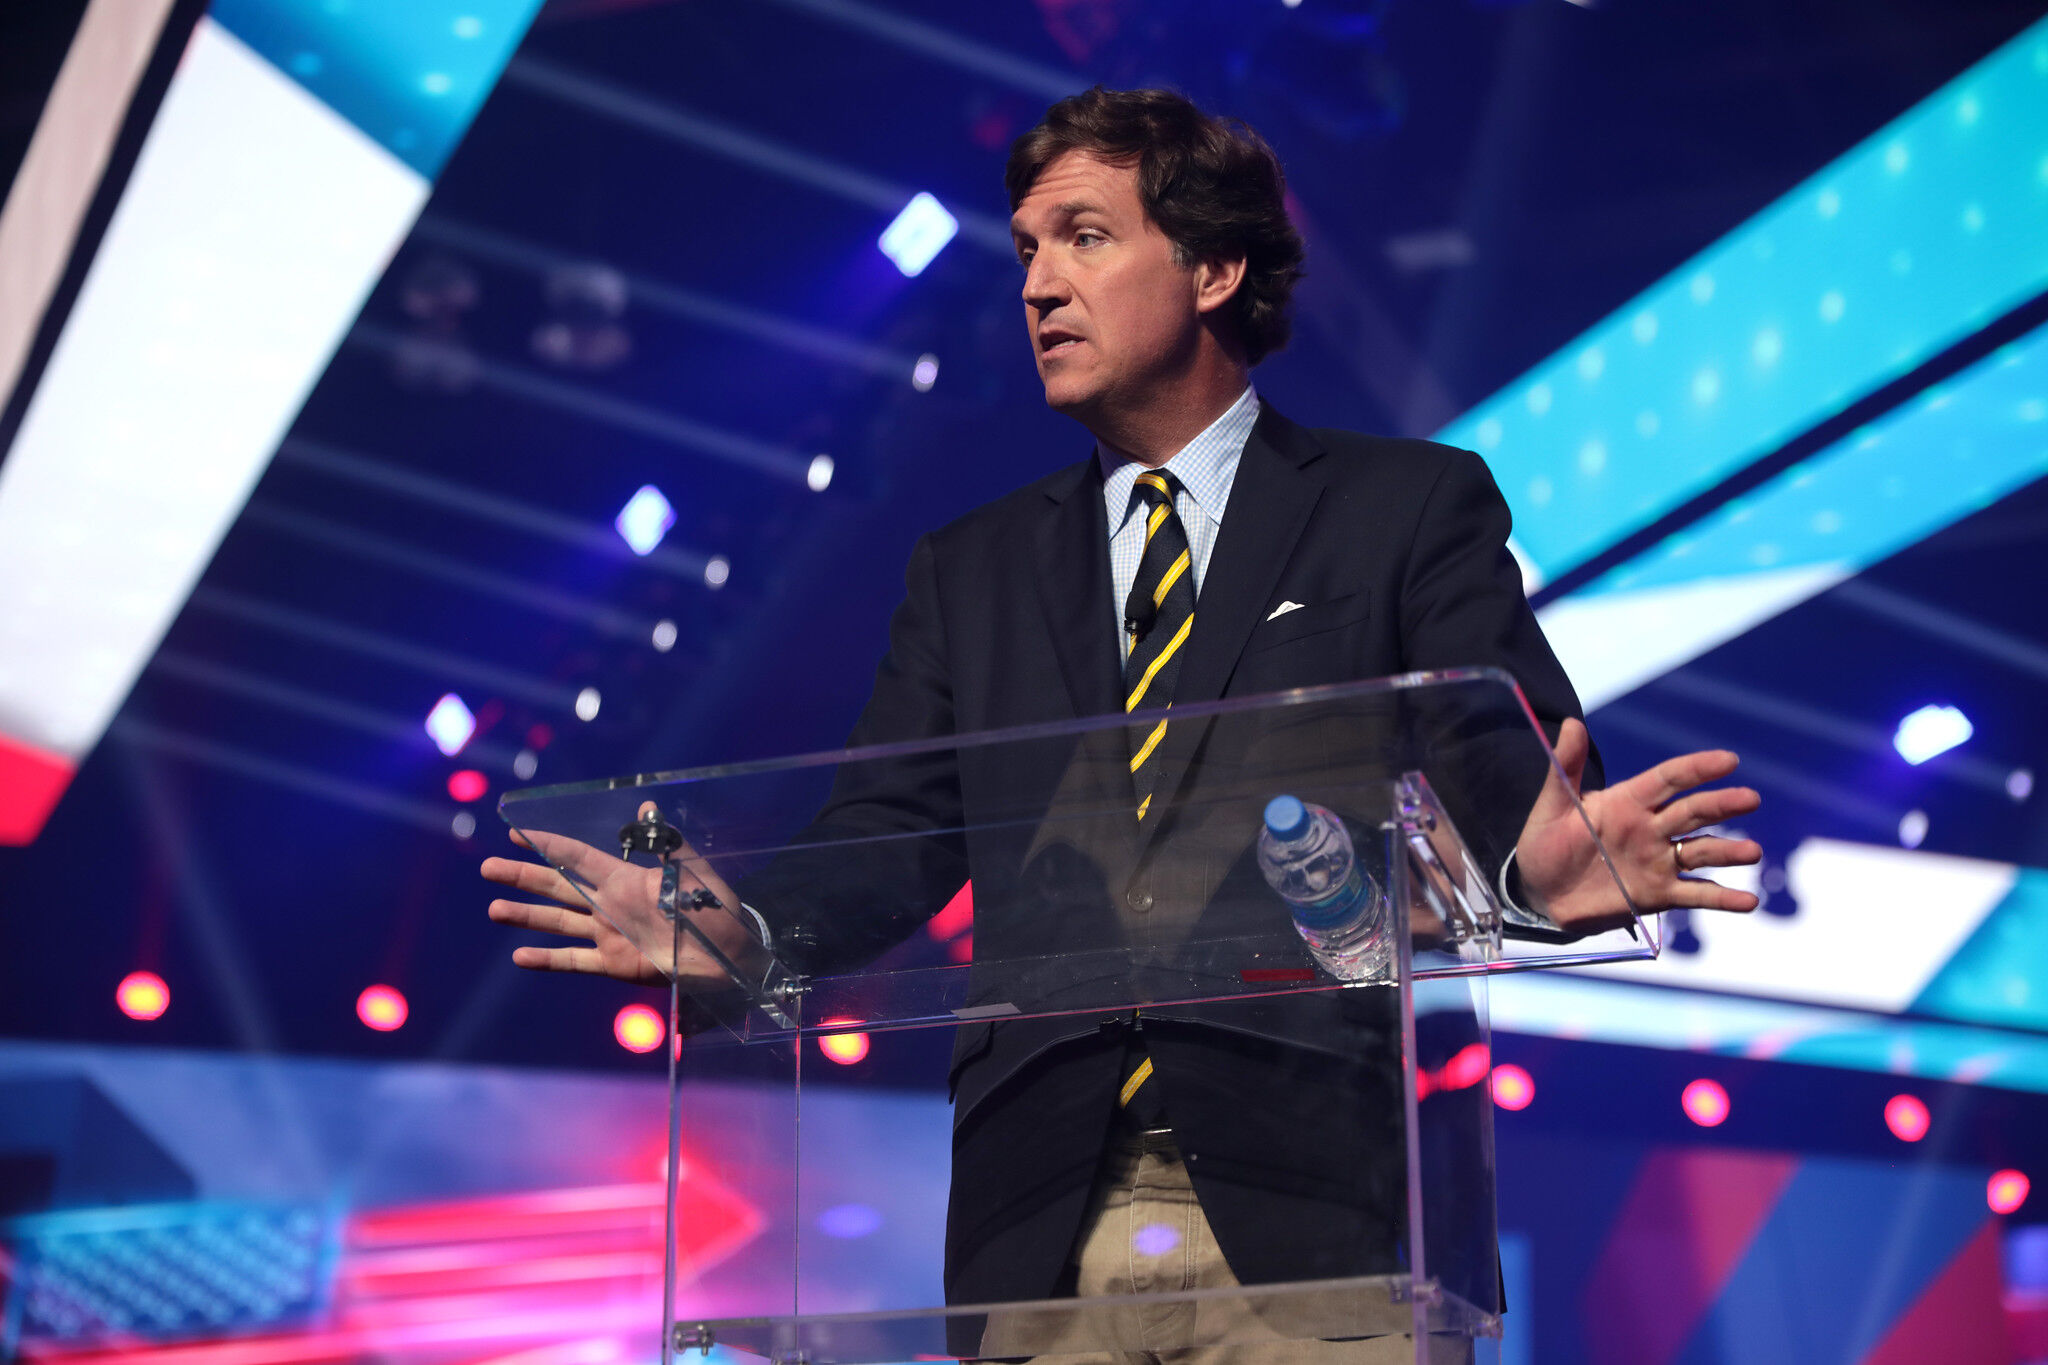 Tucker Carlson speaking with attendees at the 2021 AmericaFest at the Phoenix Convention Center in Phoenix, Arizona.